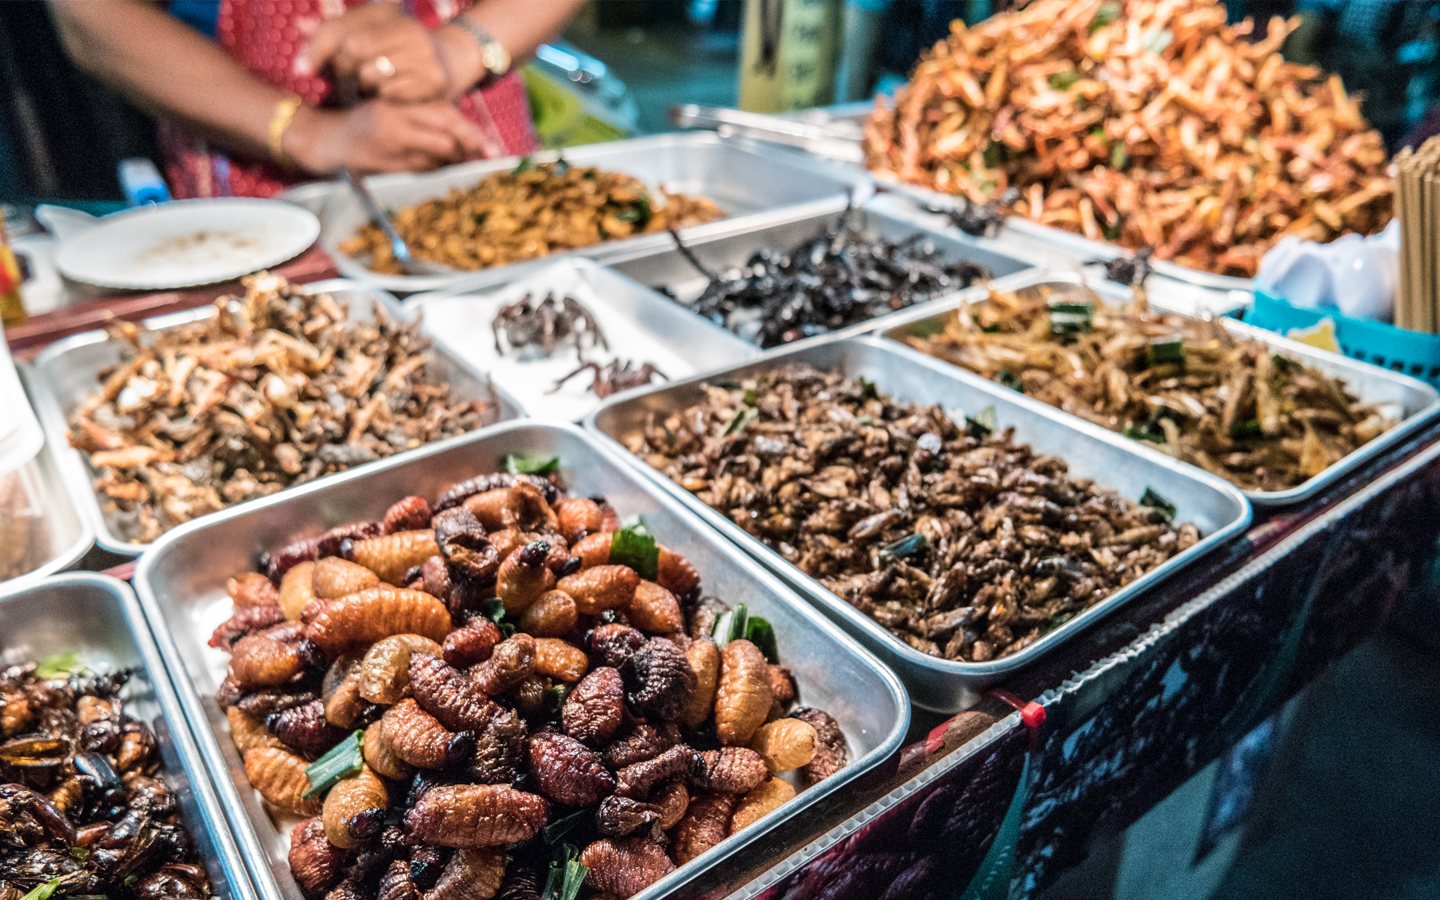 Crispy insects at a market